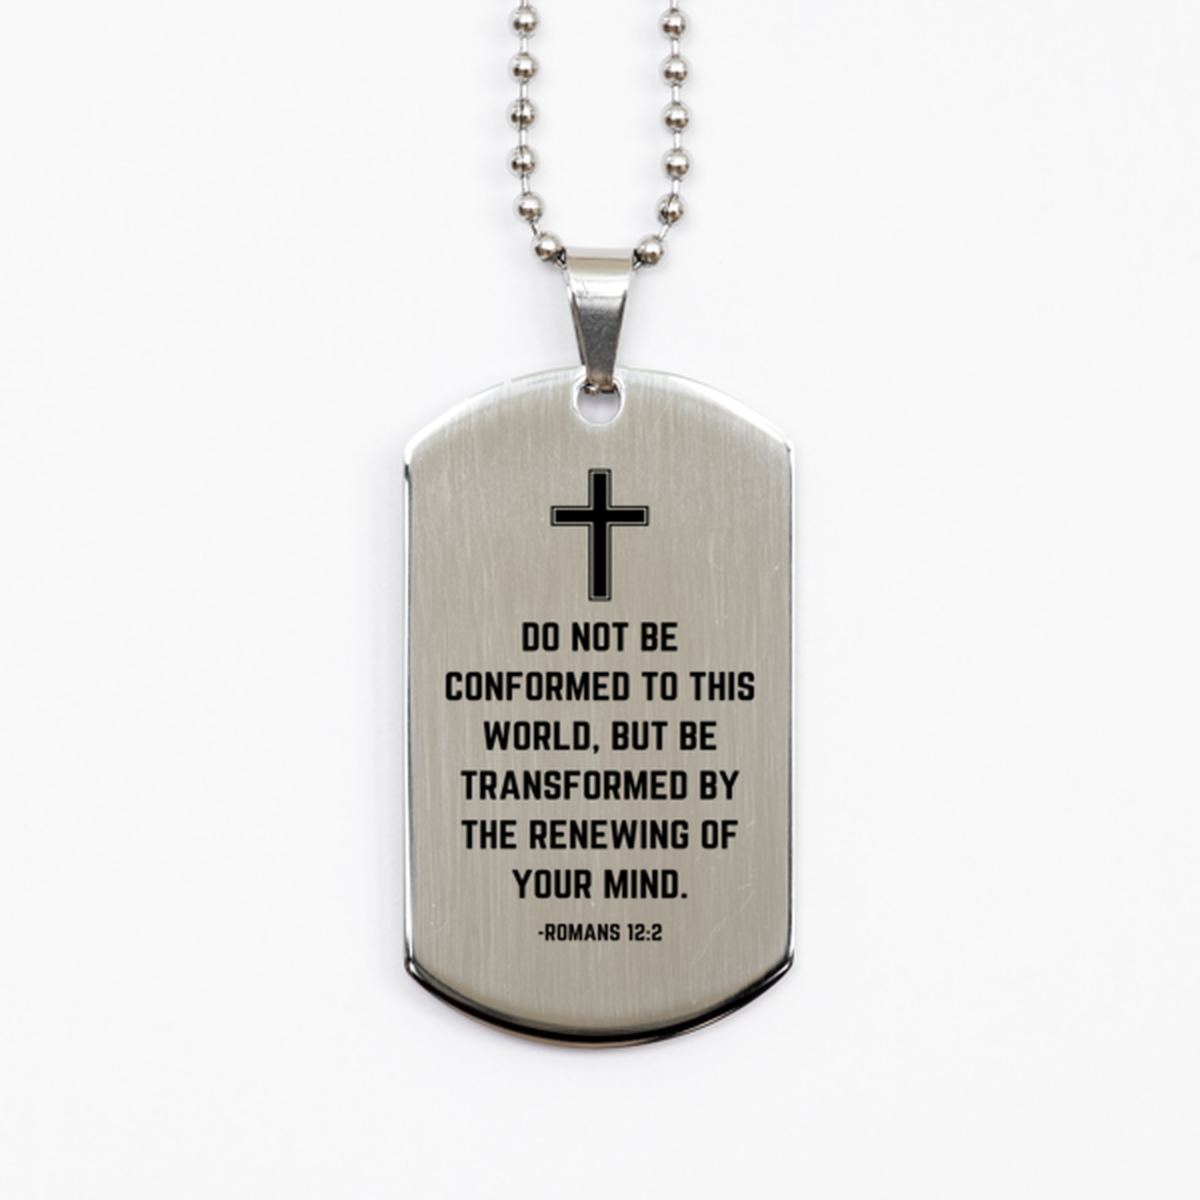 Baptism Gifts For Teenage Boys Girls, Christian Bible Verse Silver Dog Tag, Do not be conformed to this world, Confirmation Gifts, Bible Verse Necklace for Son, Godson, Grandson, Nephew